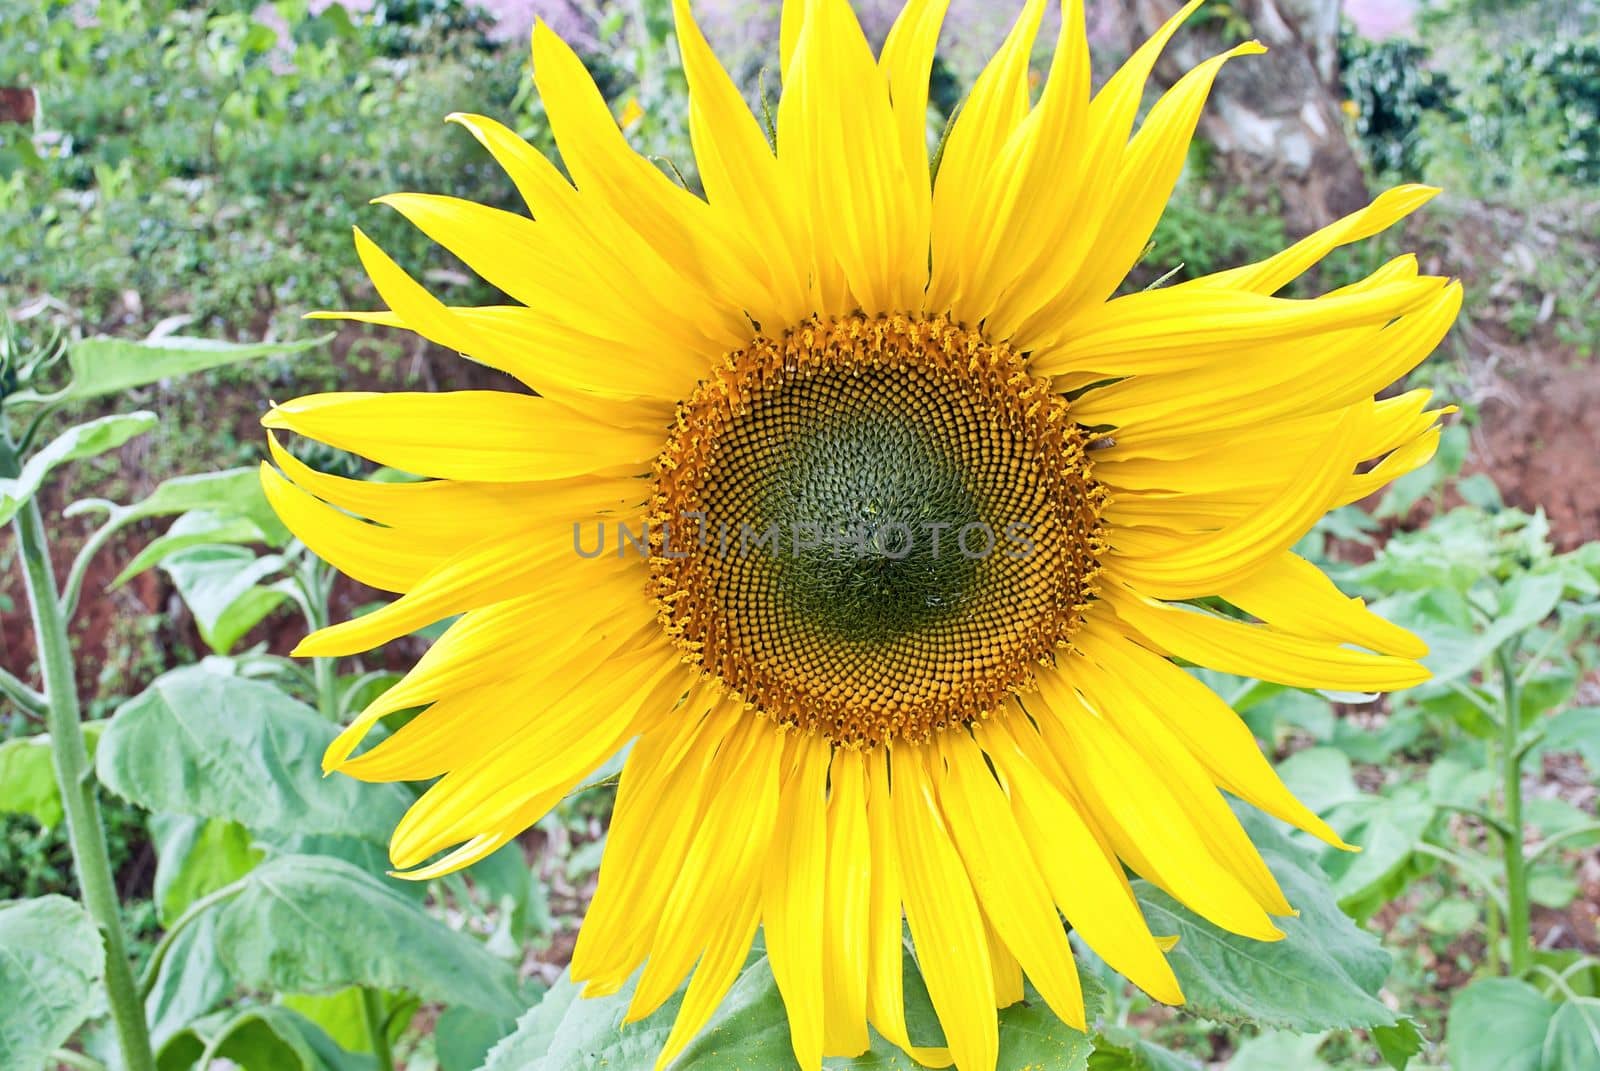 beutiful close-up sunflower in cultivated agricultural field by rakoptonLPN